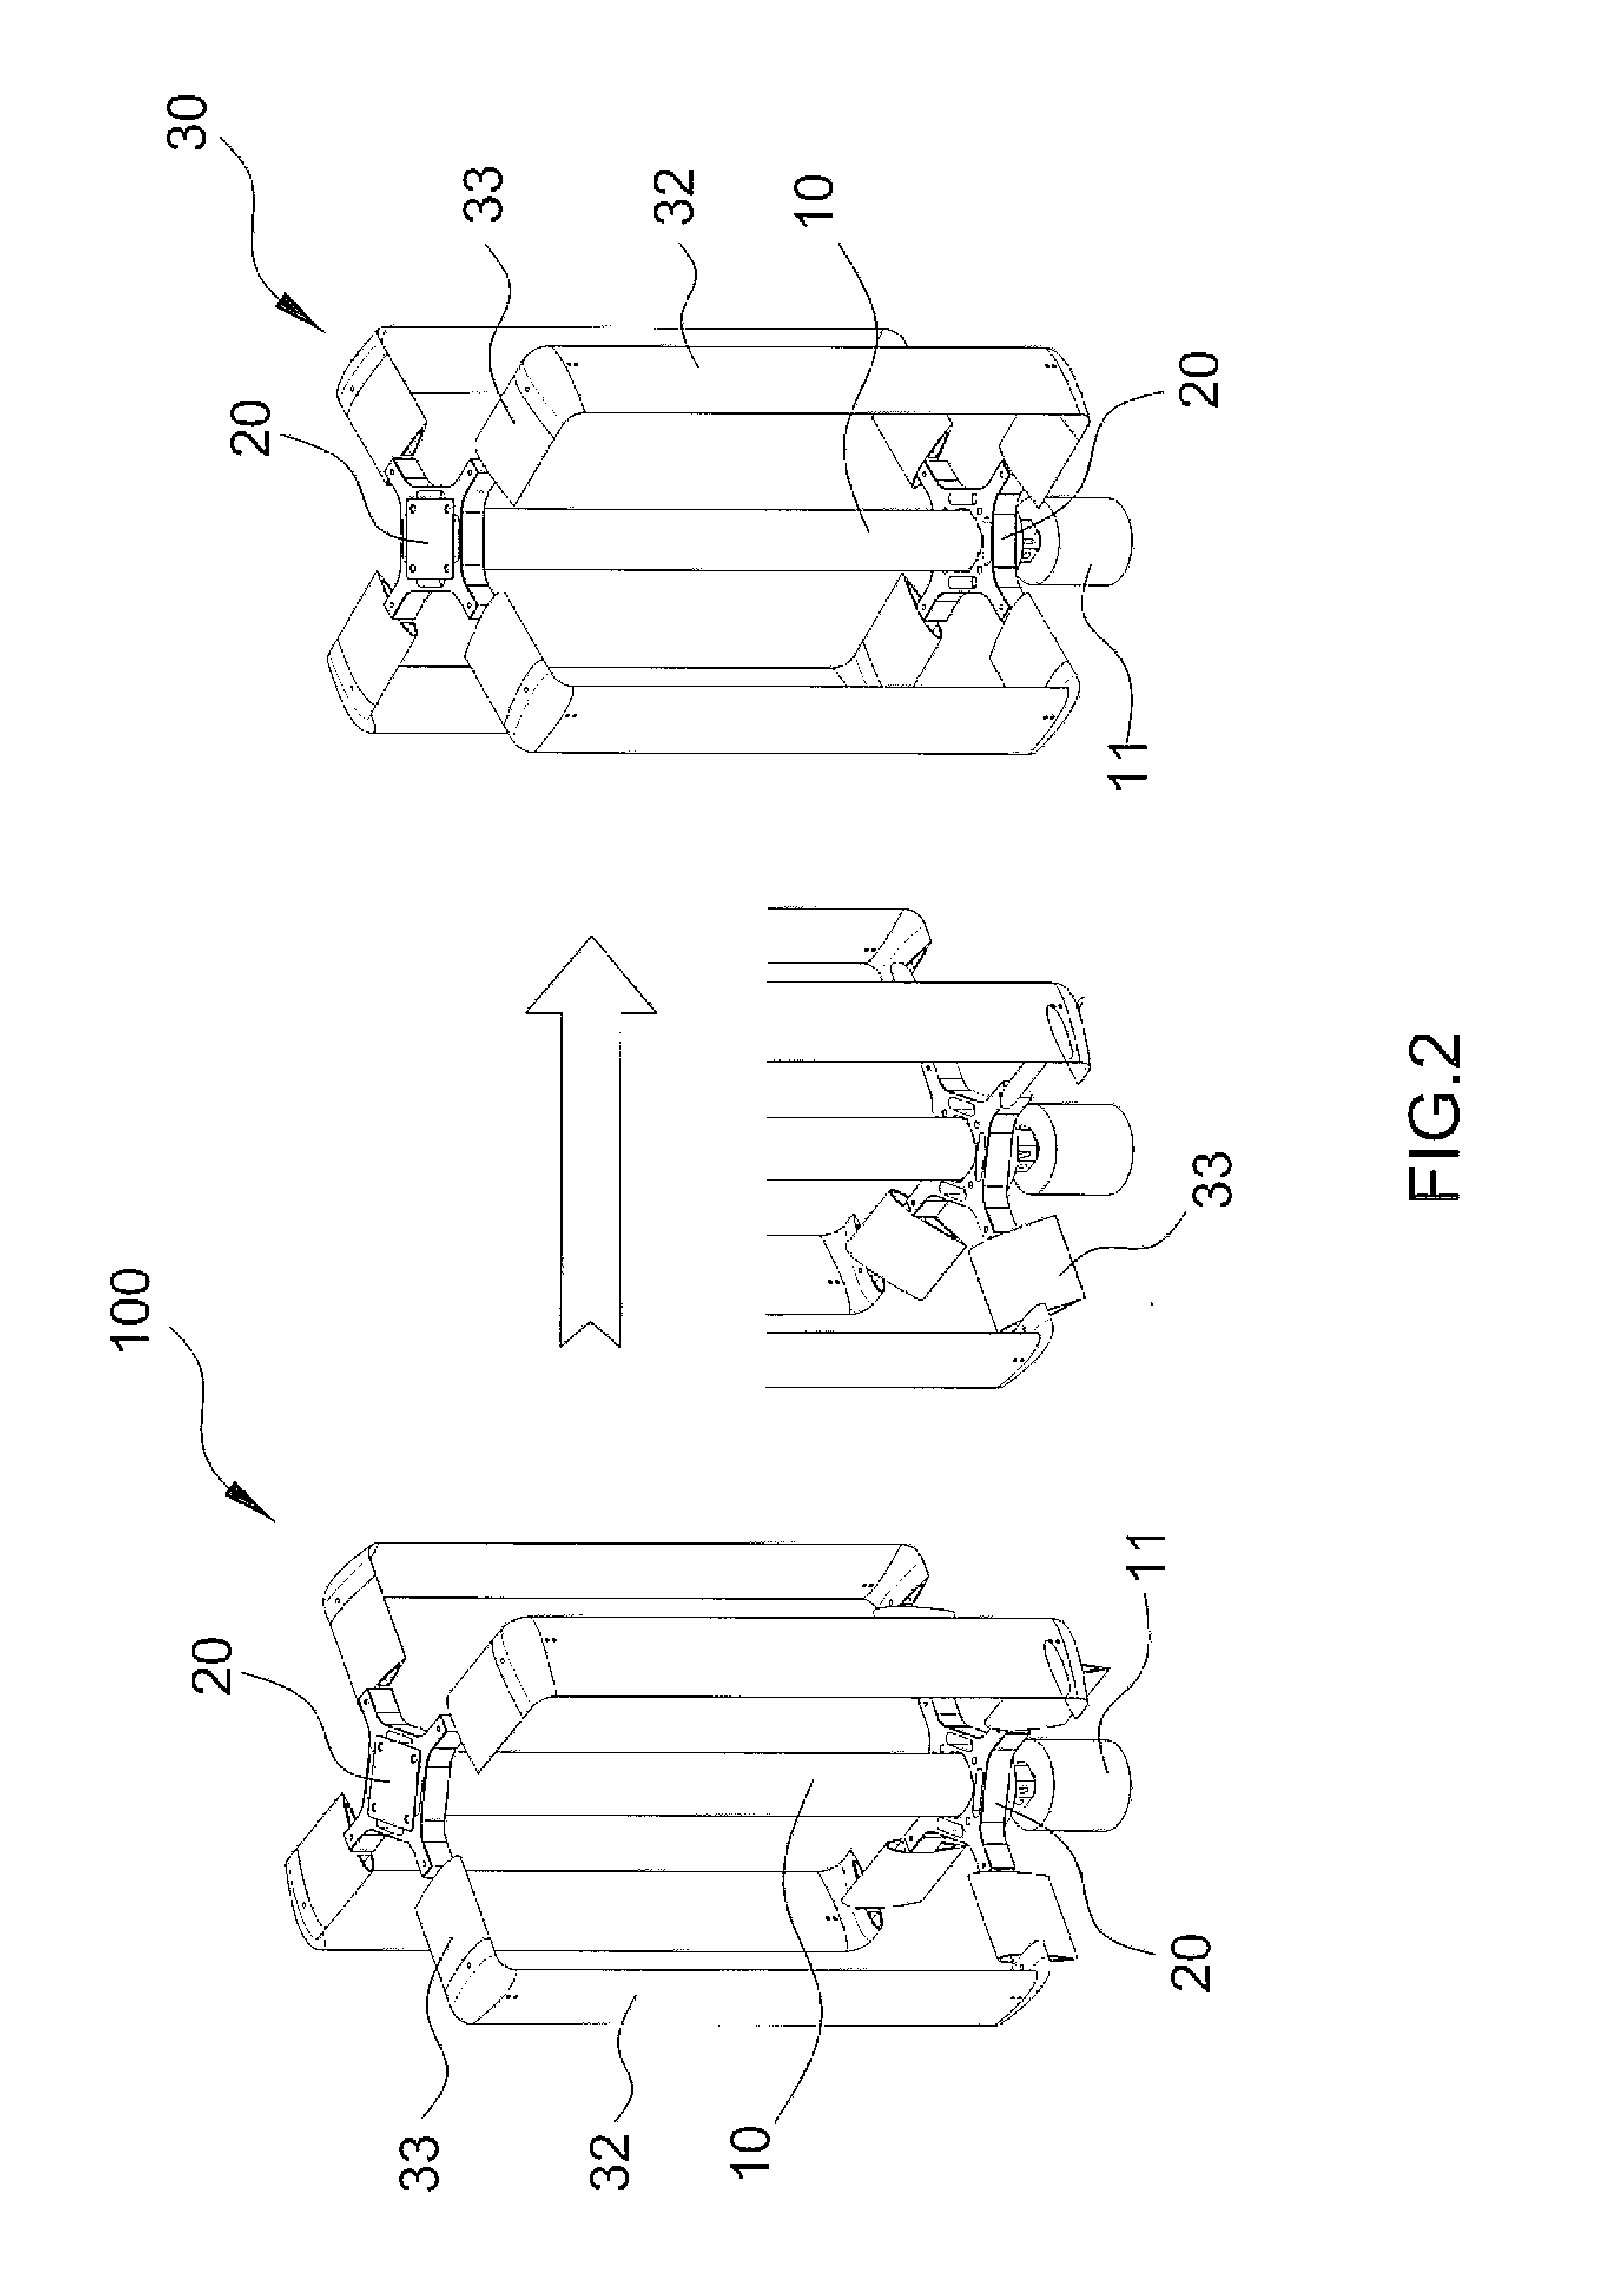 Wind Turbine Device Having Rotor for Starting Up and Avoiding Overspeed